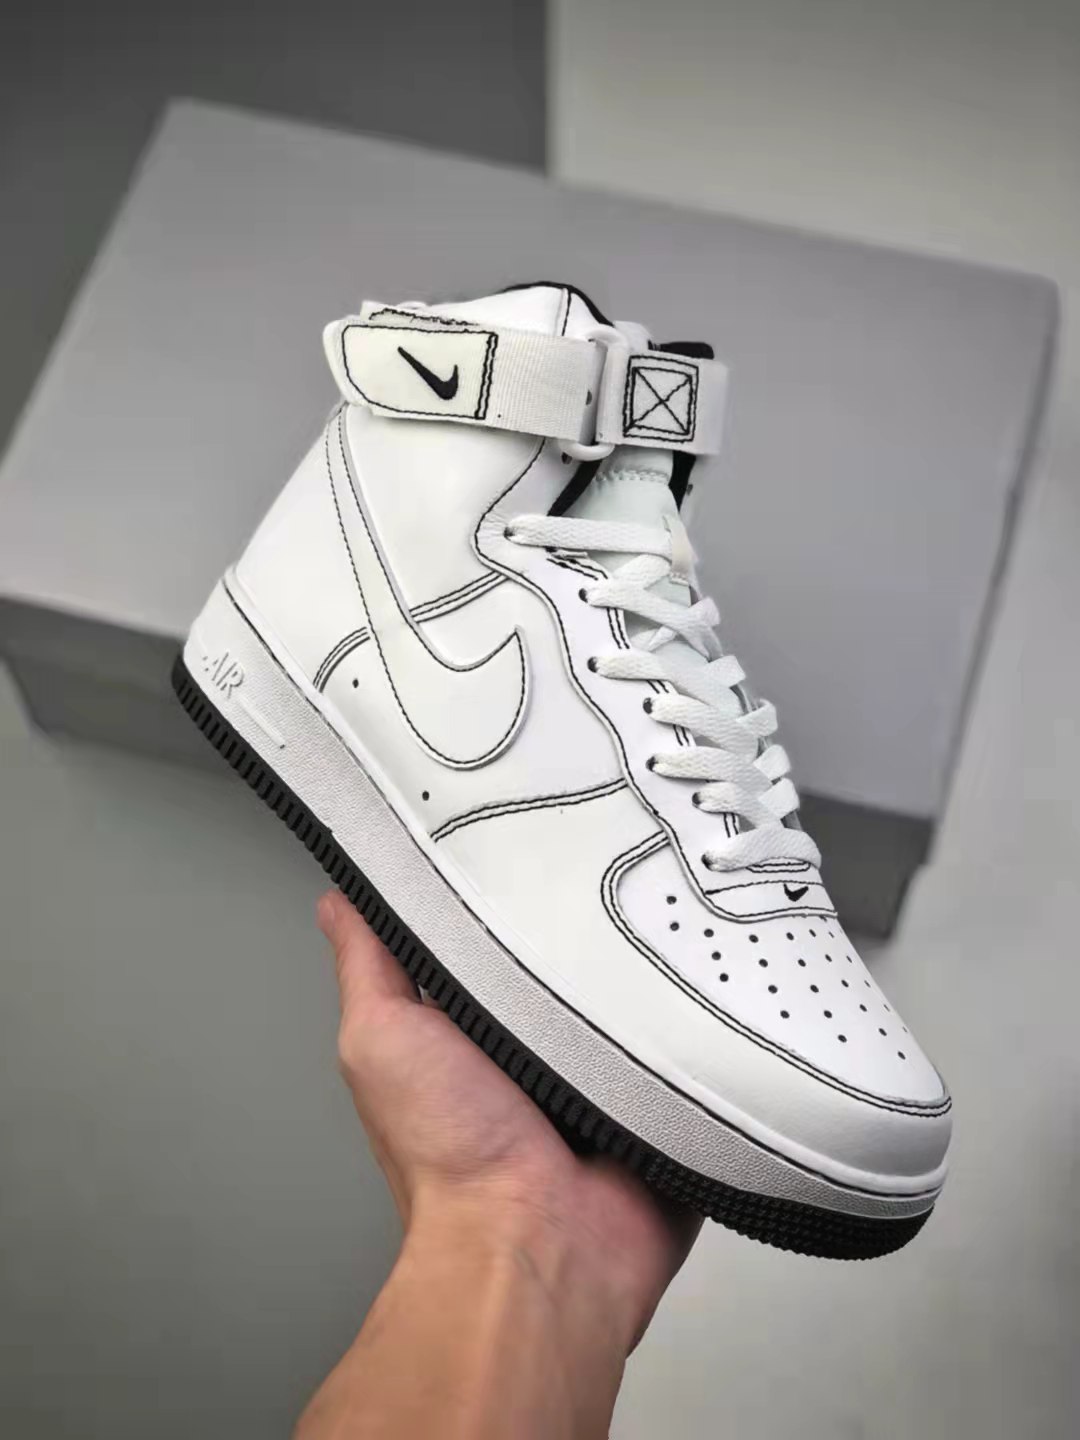 Nike Air Force 1 High 07 White Black CV1753-104 - Classic Style and Premium Quality